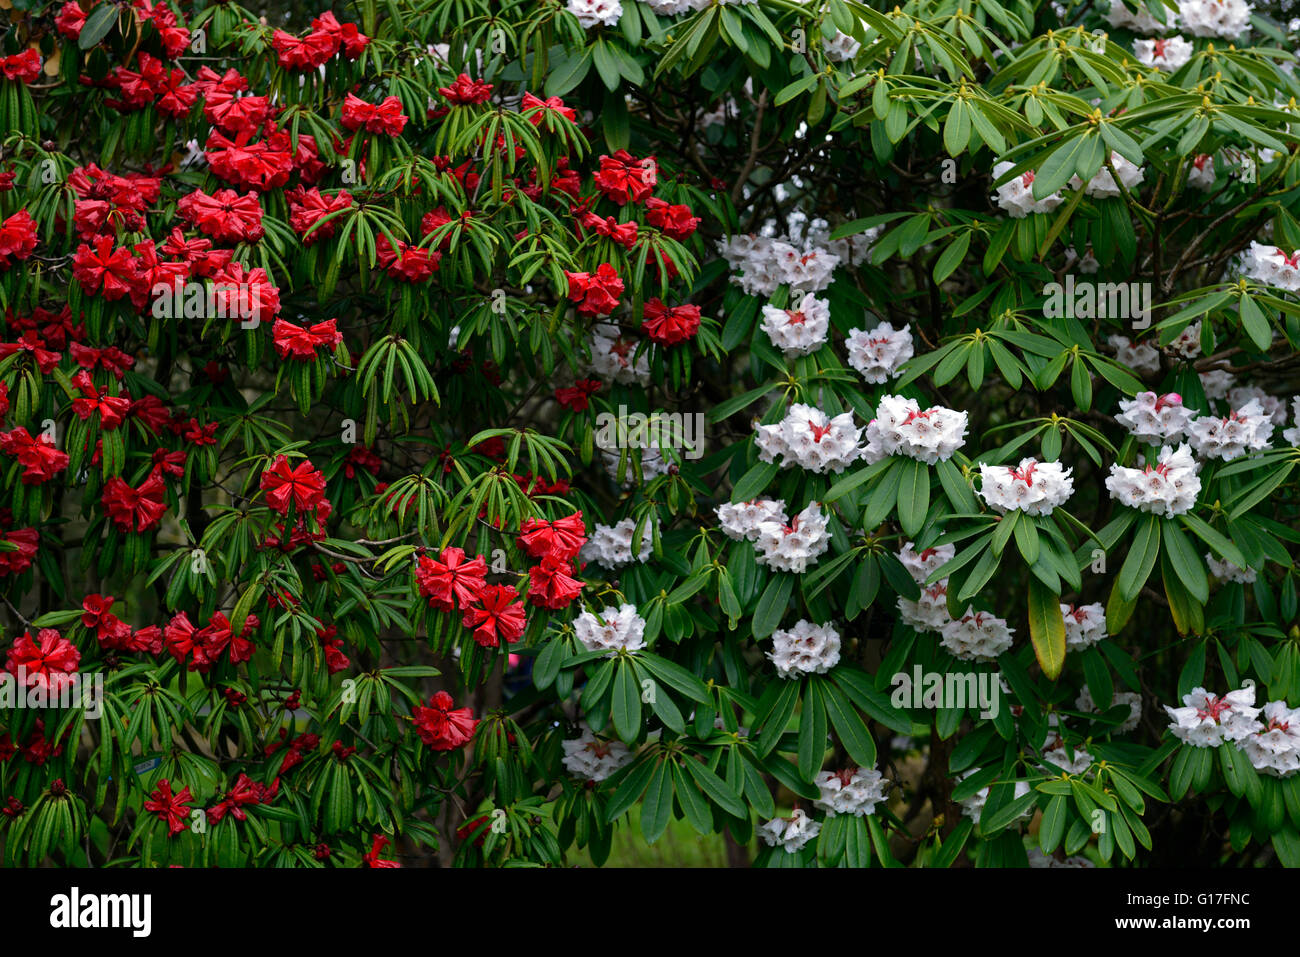 rhododendron strigillosum rhododendron calophytum spring red white combination flower flowers bloom blossom blossoms contrast Stock Photo